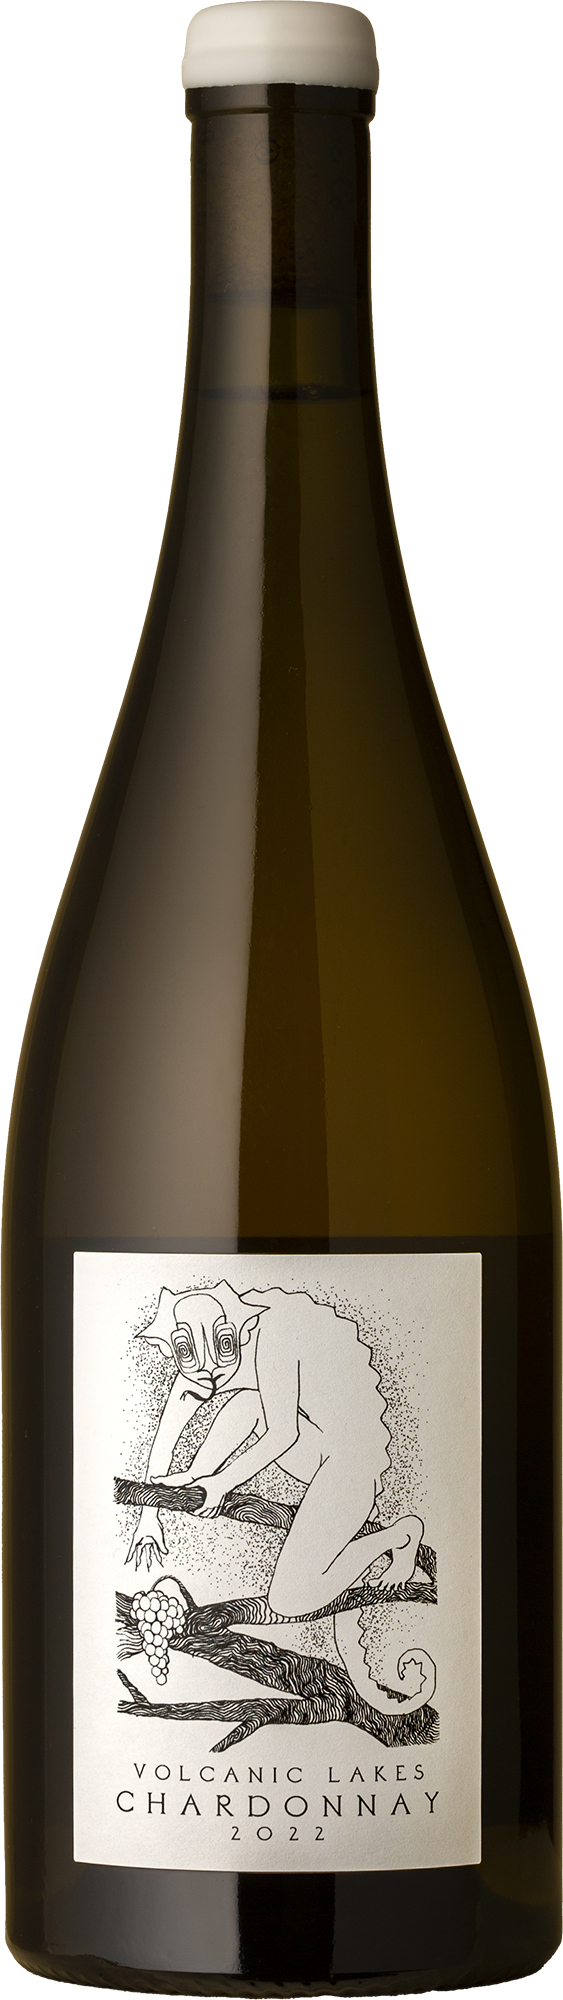 Good Intentions Wine Co. - Volcanic Lakes Chardonnay 2022 White Wine